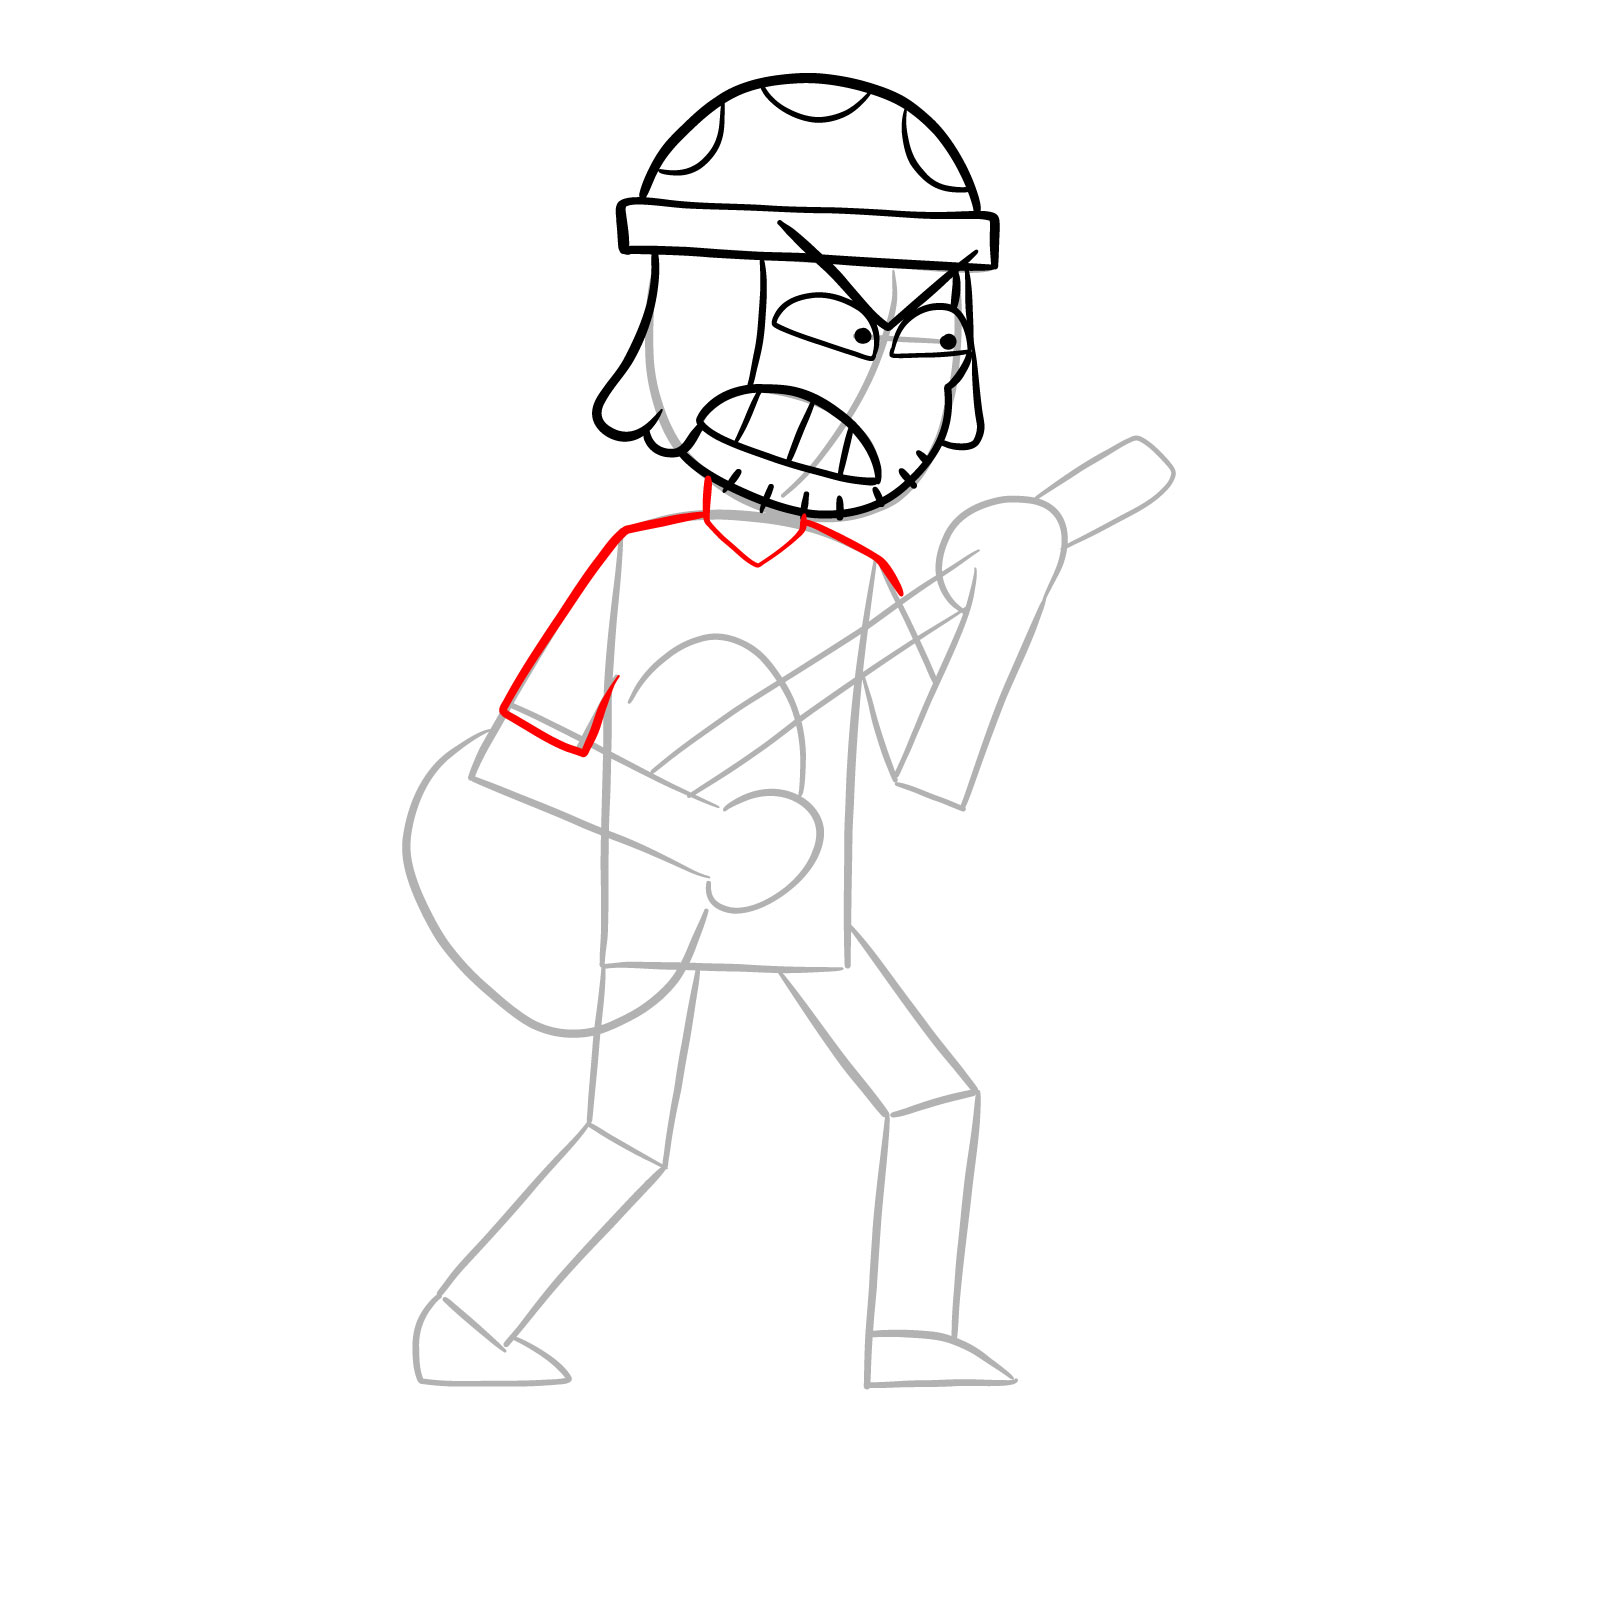 How to draw Suction Cup Man with a guitar - step 12